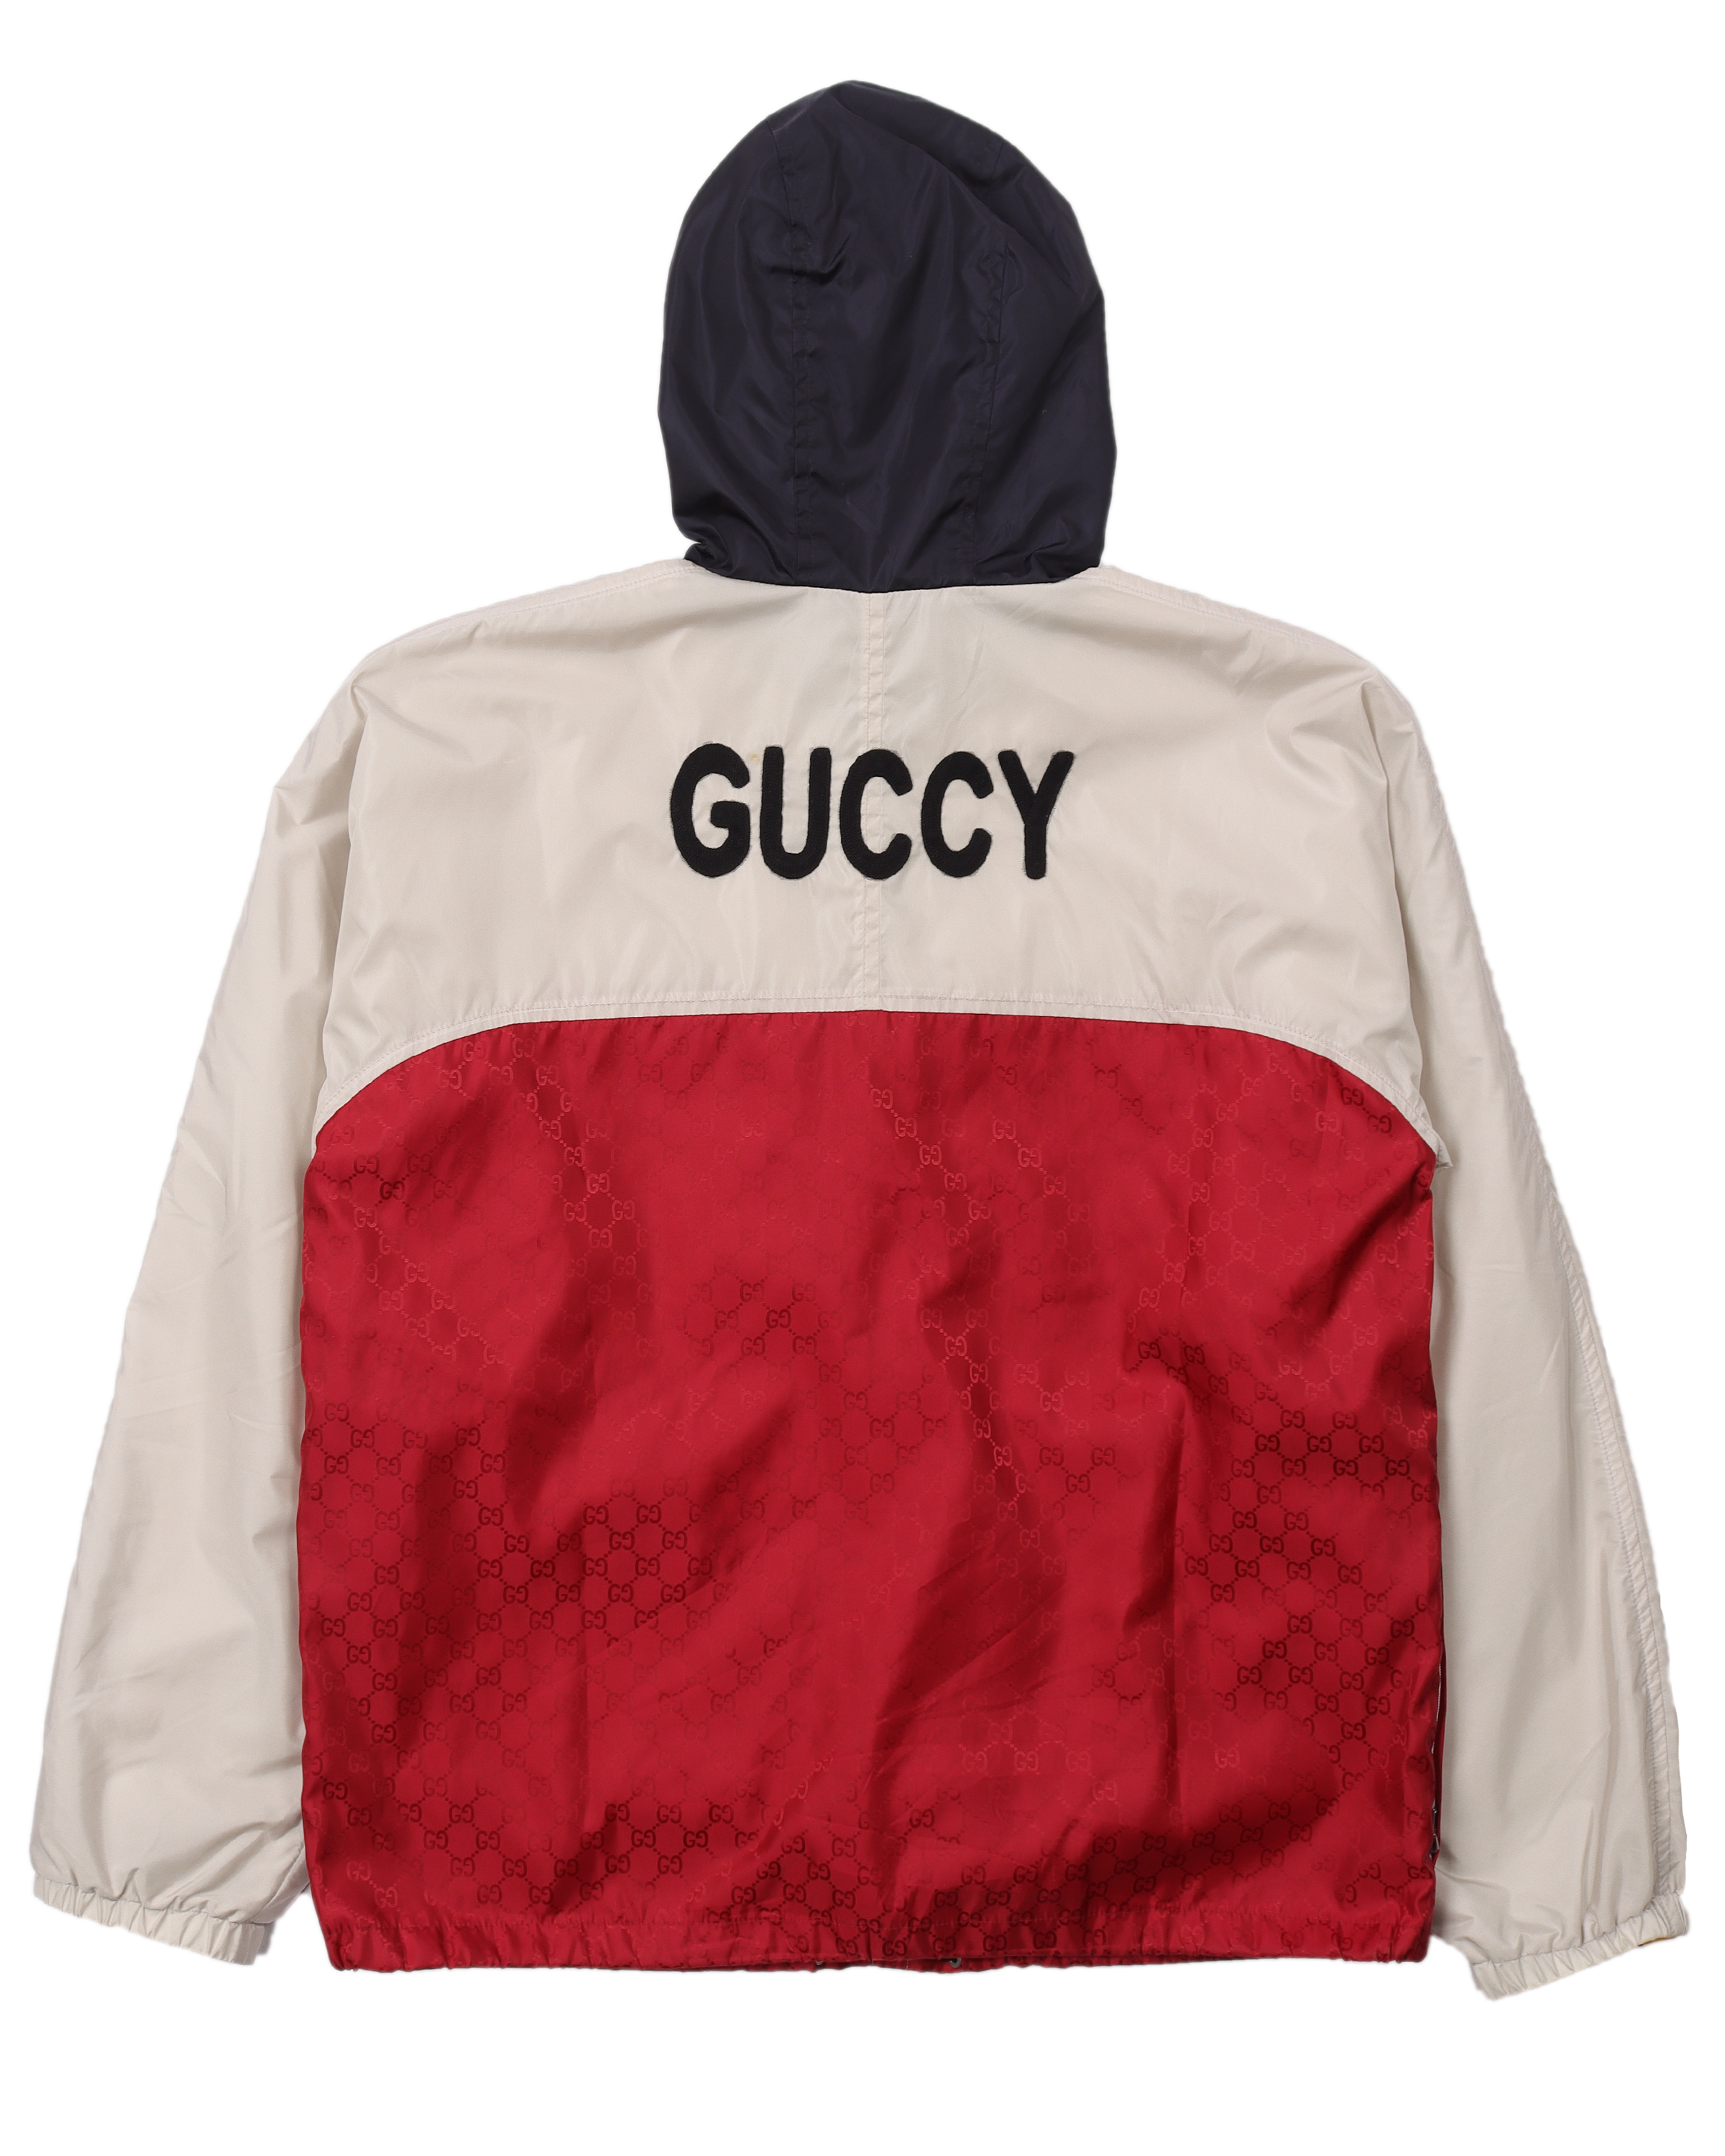 GUCCI Red Goose Down Hooded Vest Jacket with Snake Logo Embroidery 48 Euro  Small